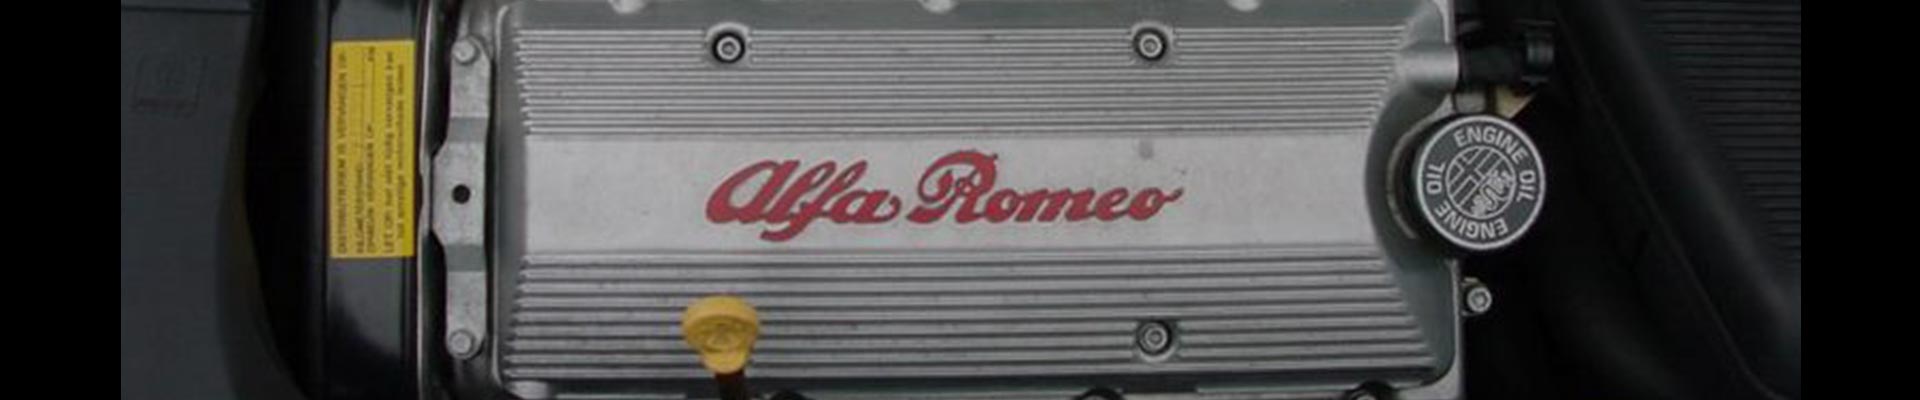 Shop Replacement Alfa Romeo Spider Parts with Discounted Price on the Net